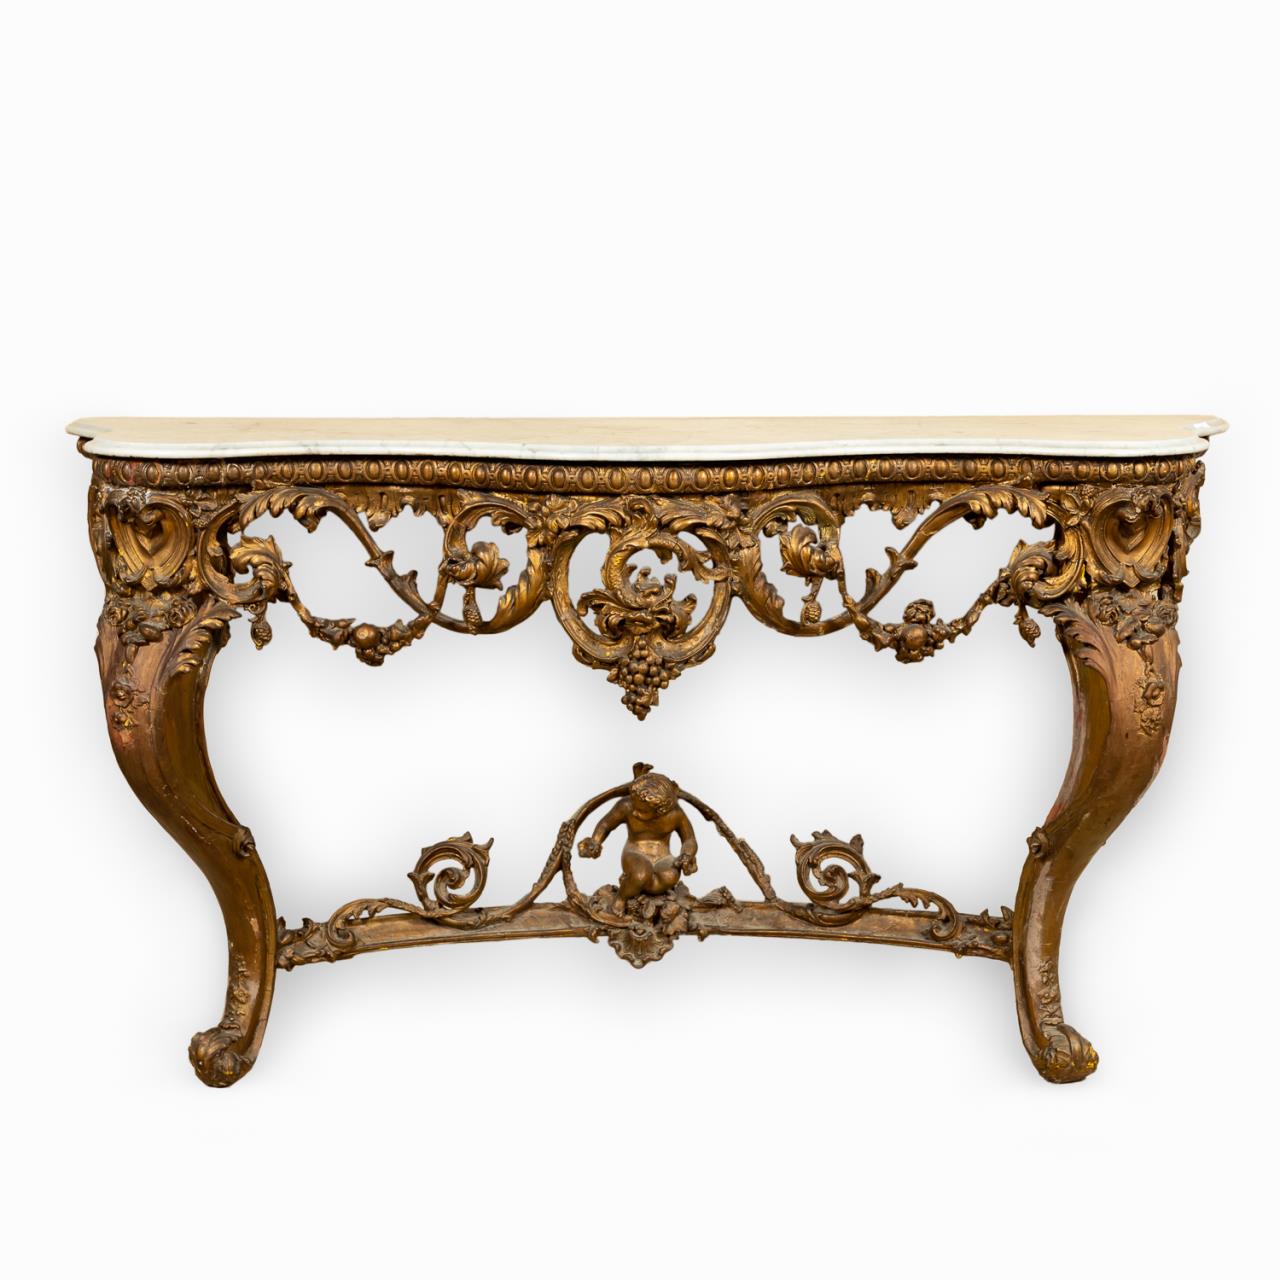 LOUIS XV STYLE MARBLE TOP GILTWOOD 359a63